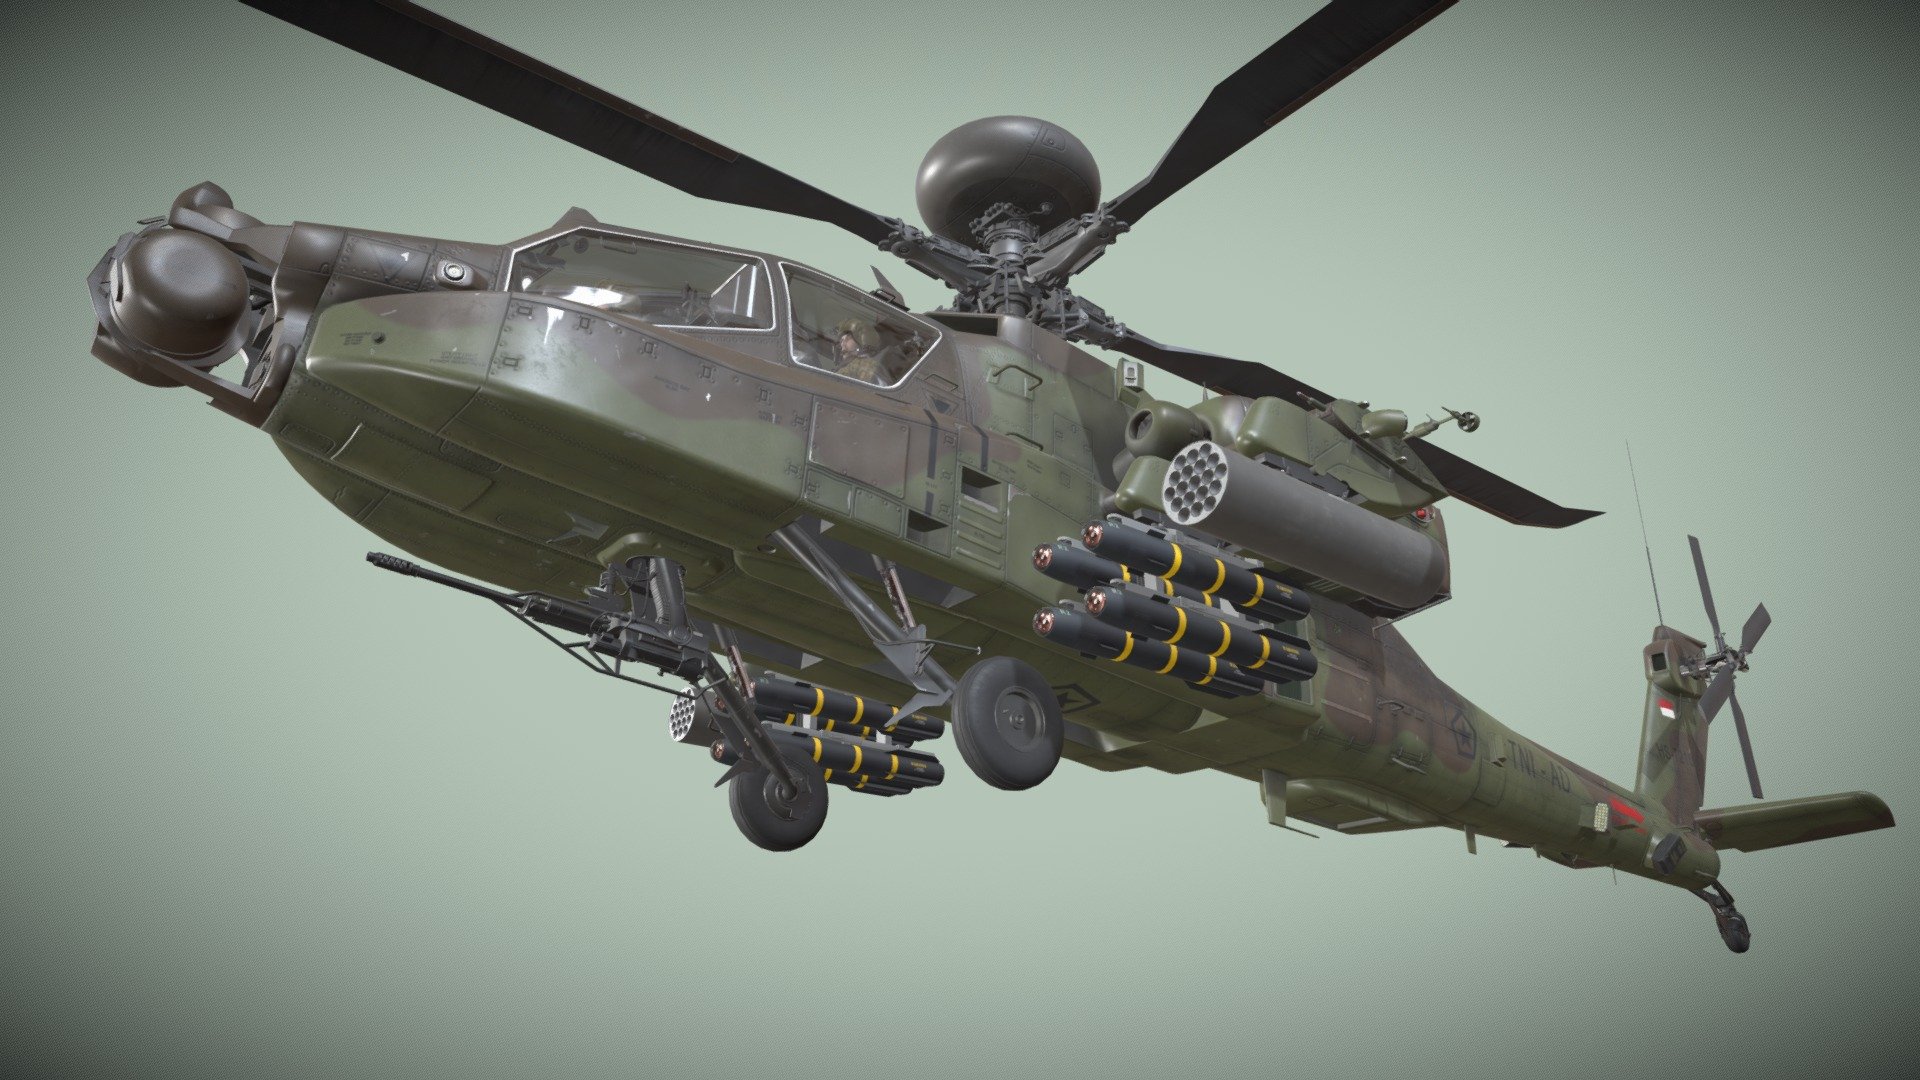 Helicopter Apache AH-64E Guardian Indonesia Basic Animation


Static and Complex Animation versions are available as seperate models (see my profile models)


File formats: 3ds Max 2021, FBX, Unity 2021.3.5f1


This model contains 6 Animations (See dropdown list below the time line)


Weapon:


External Fuel Tank 

Launcher M-260 with Hydra 70 missiles 

Launcher M-261 with Hydra 70 missiles 

Hellfire launcher and missiles 

M230 chain gun 

AIM-9L Missile


This model contains PNG textures(4096x4096):


-Base Color

-Metallness

-Roughness


-Diffuse

-Glossiness

-Specular


-Emission

-Normal

-Ambient Occlusion
 - Apache AH-64E Guardian Indonesia Basic - Buy Royalty Free 3D model by pukamakara 3d model